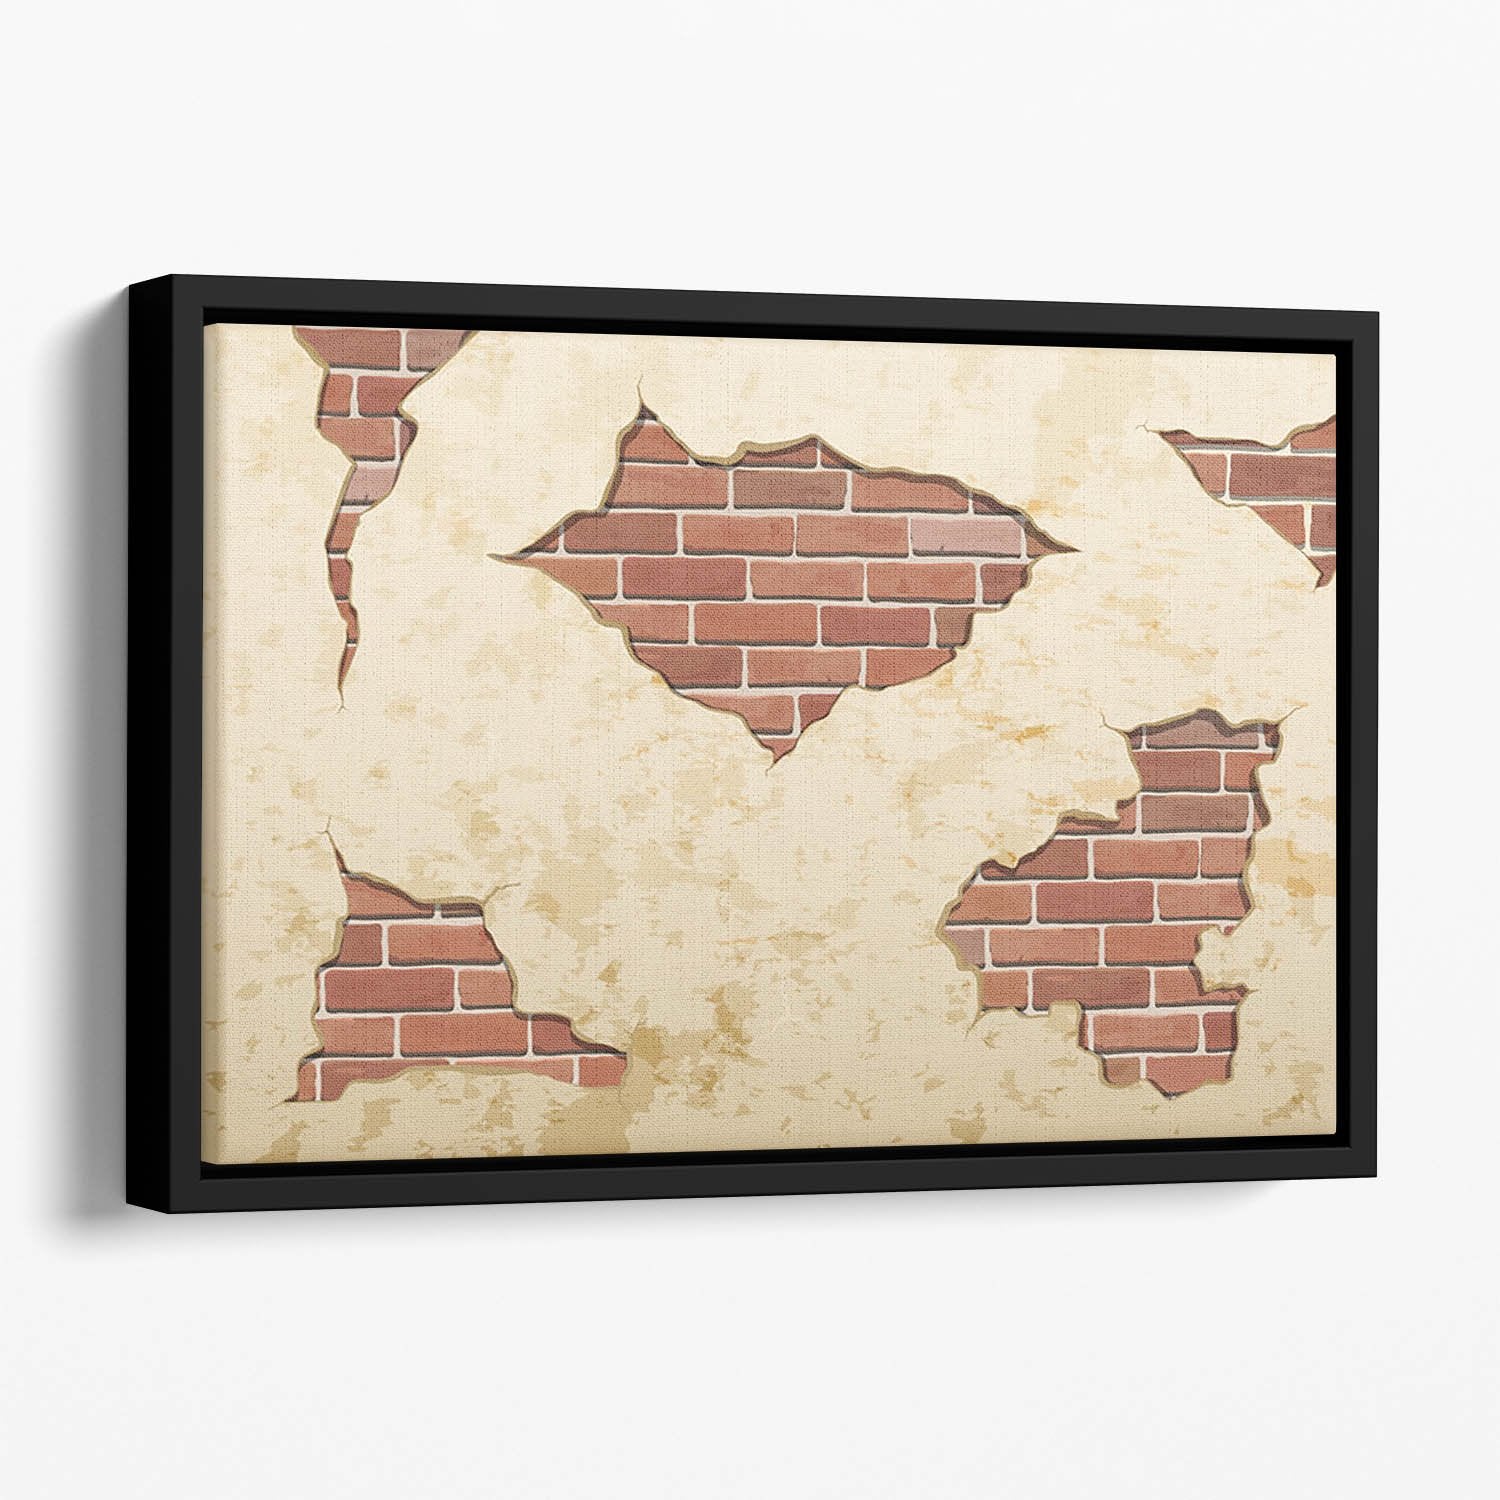 The old shabby concrete and brick cracks Floating Framed Canvas